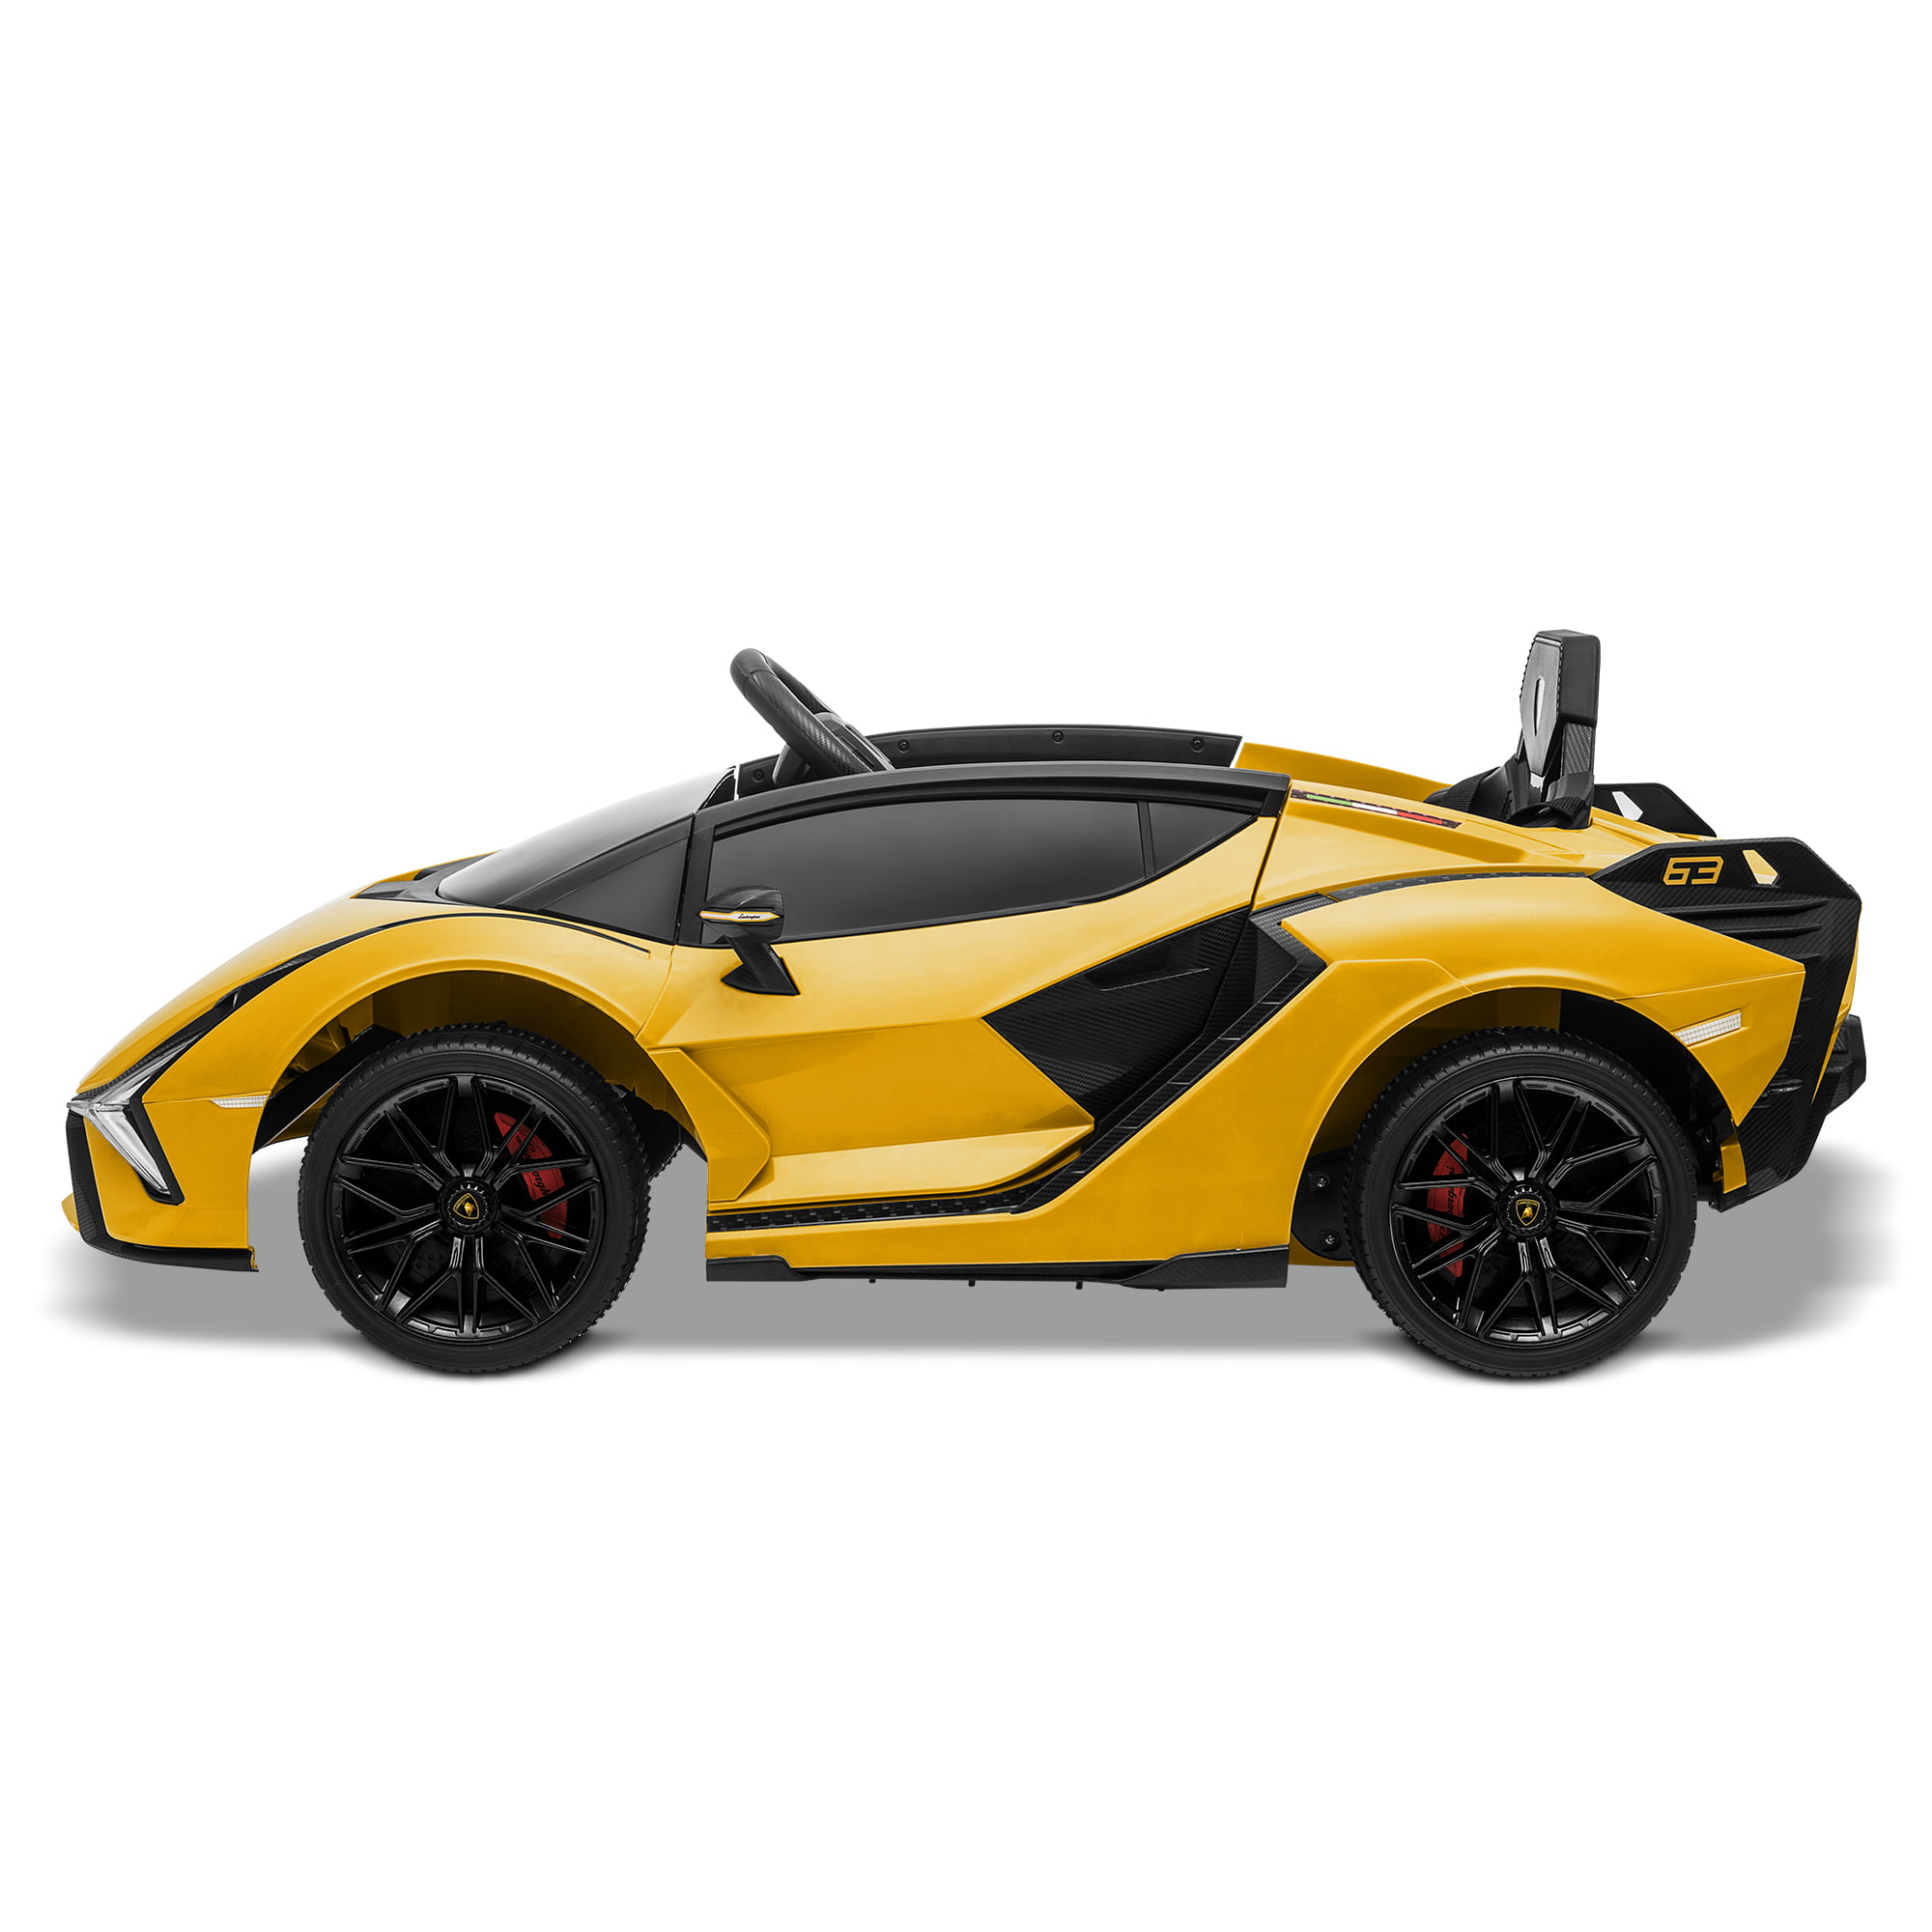 LED Lights & Music Kidzone Kids 12V Electric Ride On Licensed Lamborghini Sian Roadster Motorized Toy Car with Remote Control Wheels Suspension Green with Gold Rim 